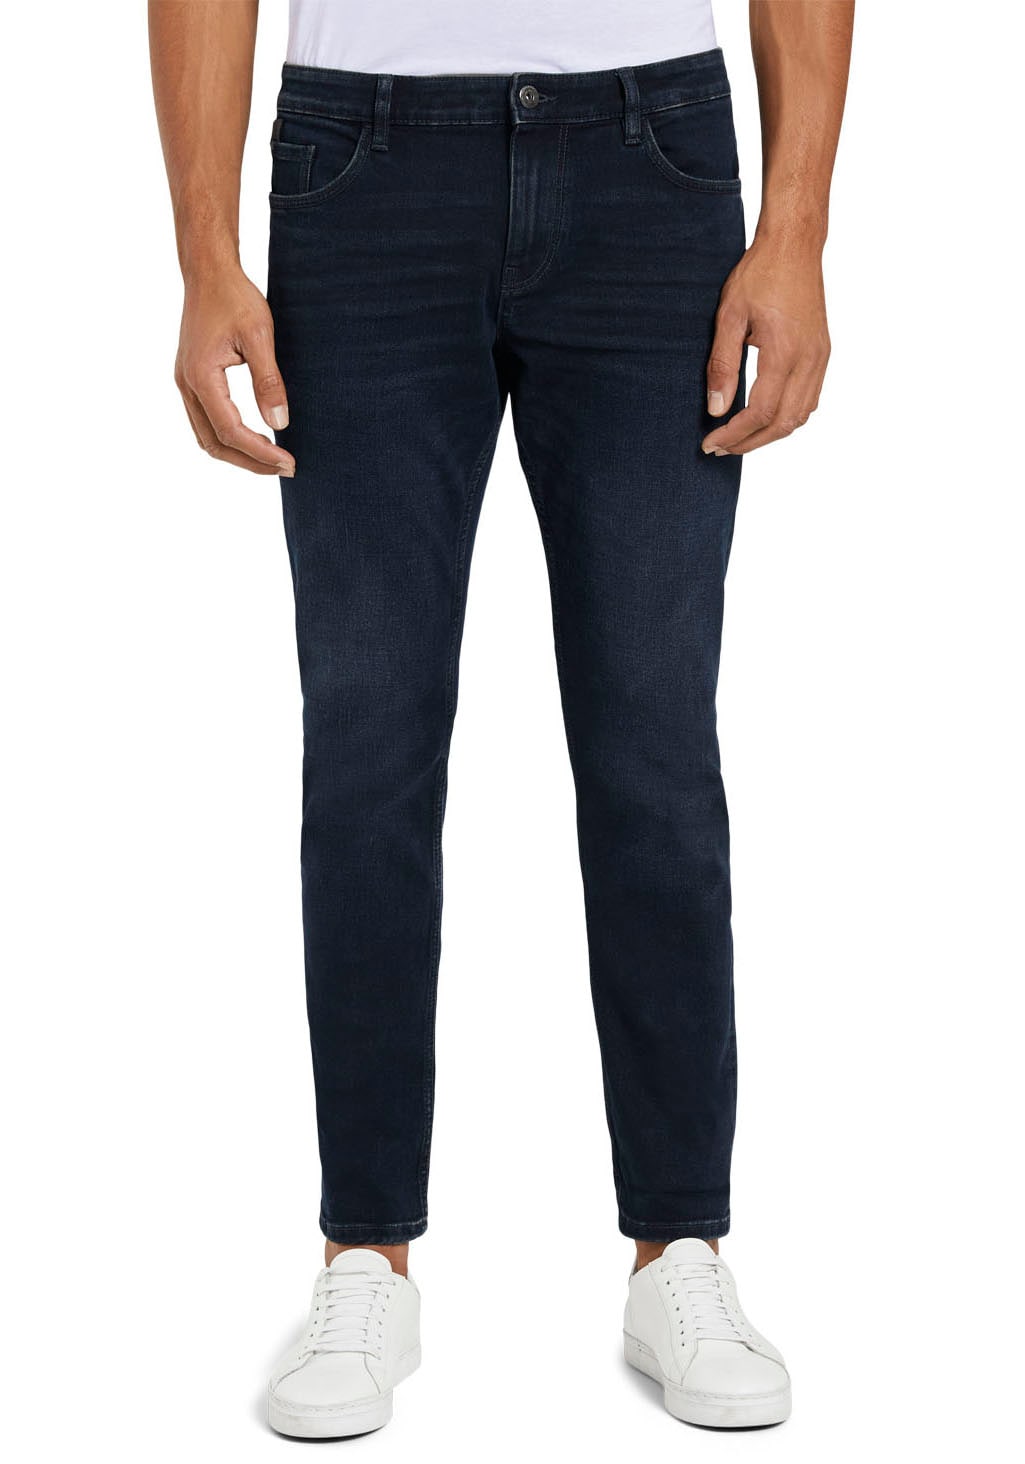 TOM TAILOR 5-Pocket-Jeans "Josh", in Used-Waschung